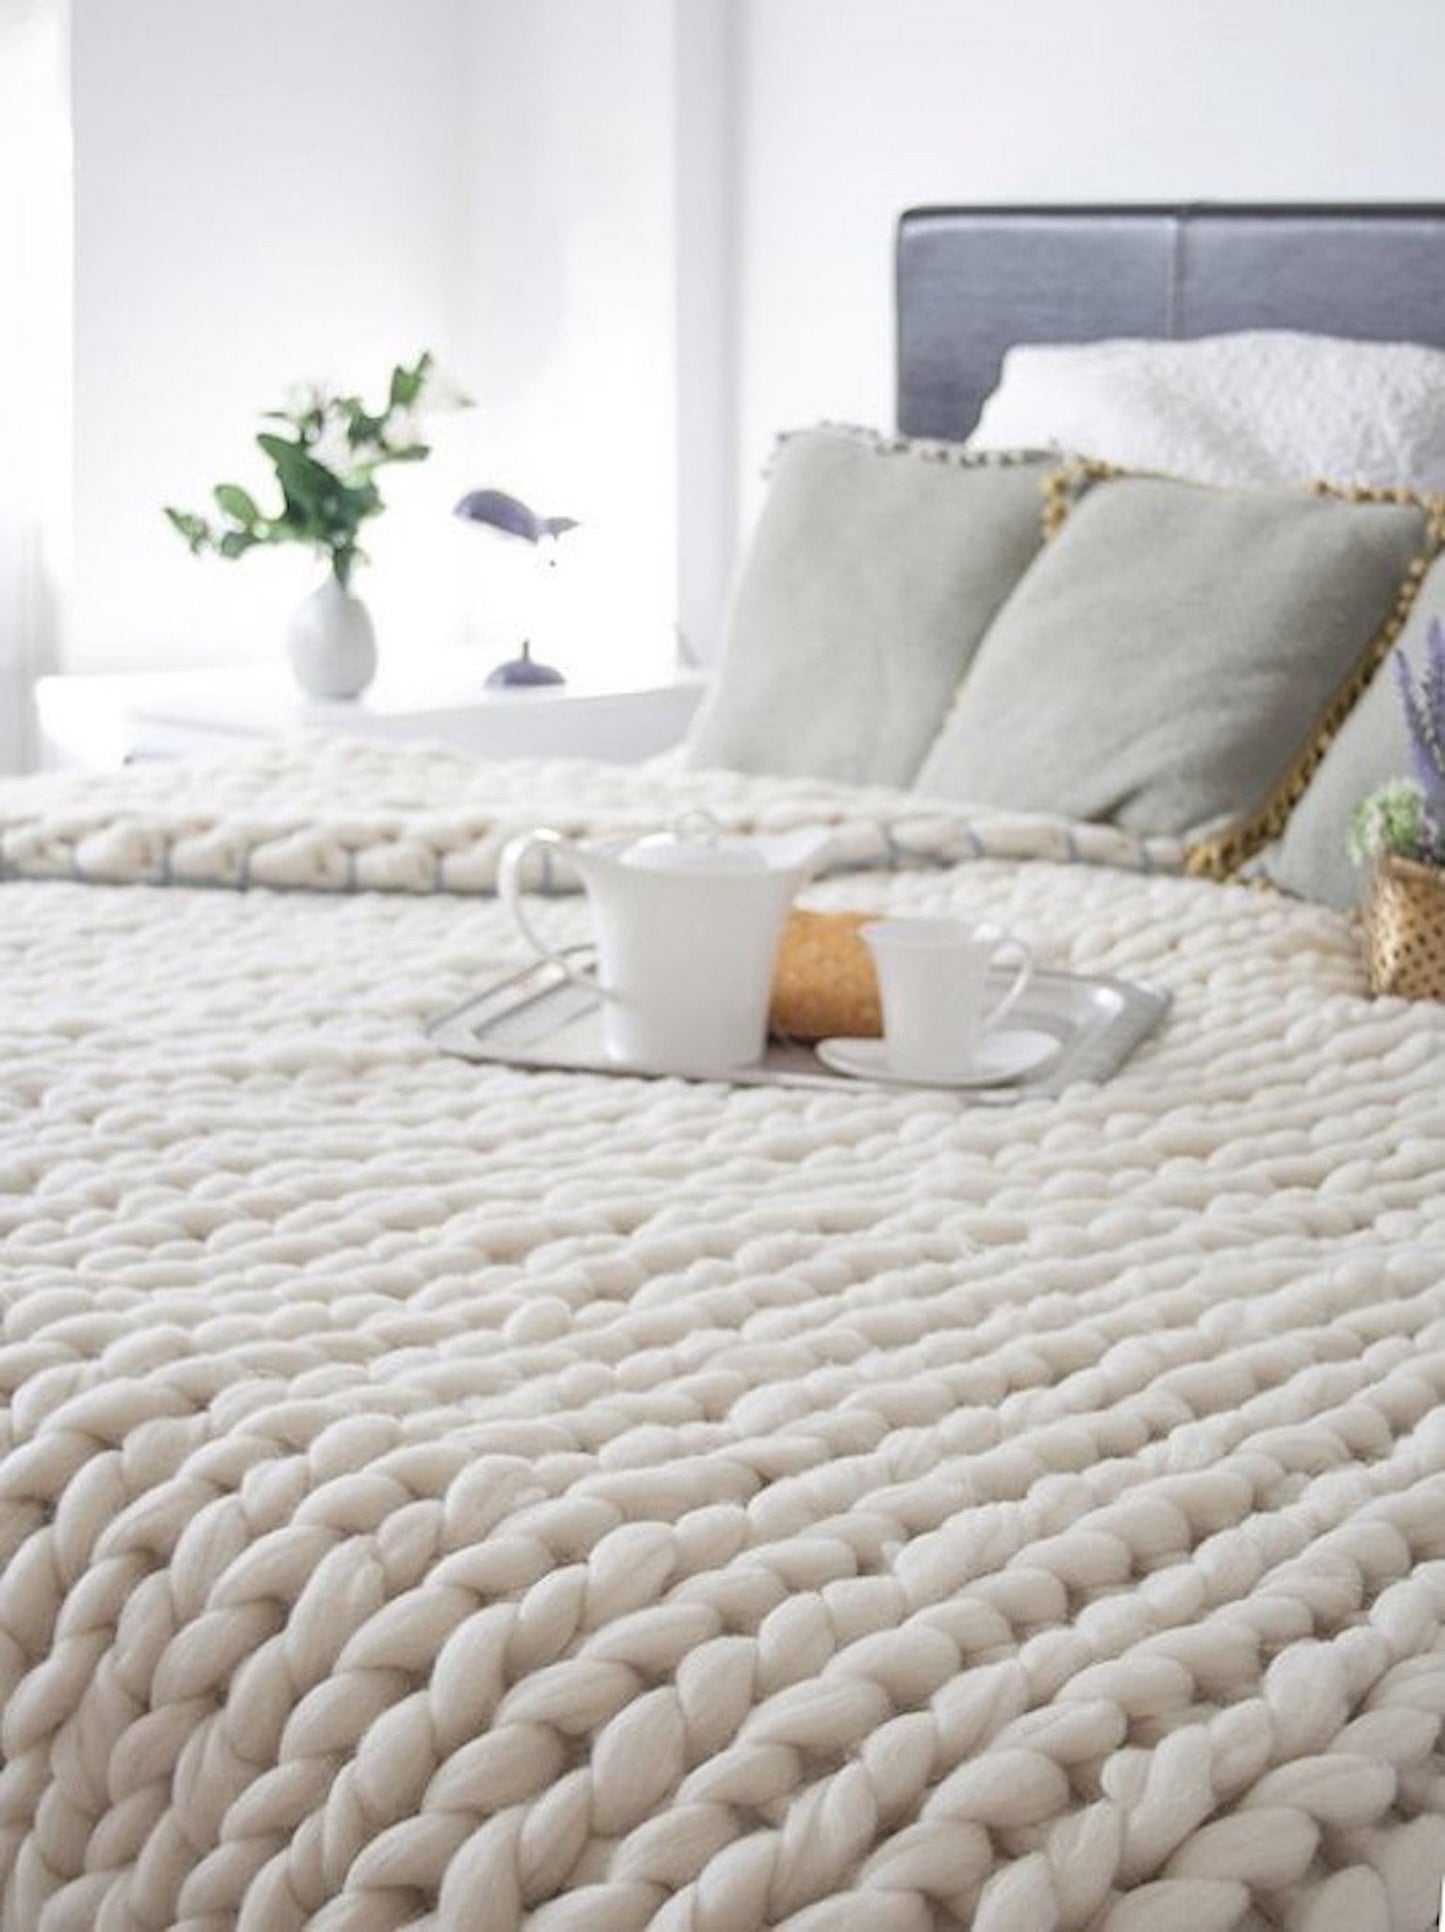 Chunky Knit Wool Blanket Choose Twin Throw, Queen or King and and color merino wool!  Warm Cozy and makes a warm freindly and inviting statement as home decor.